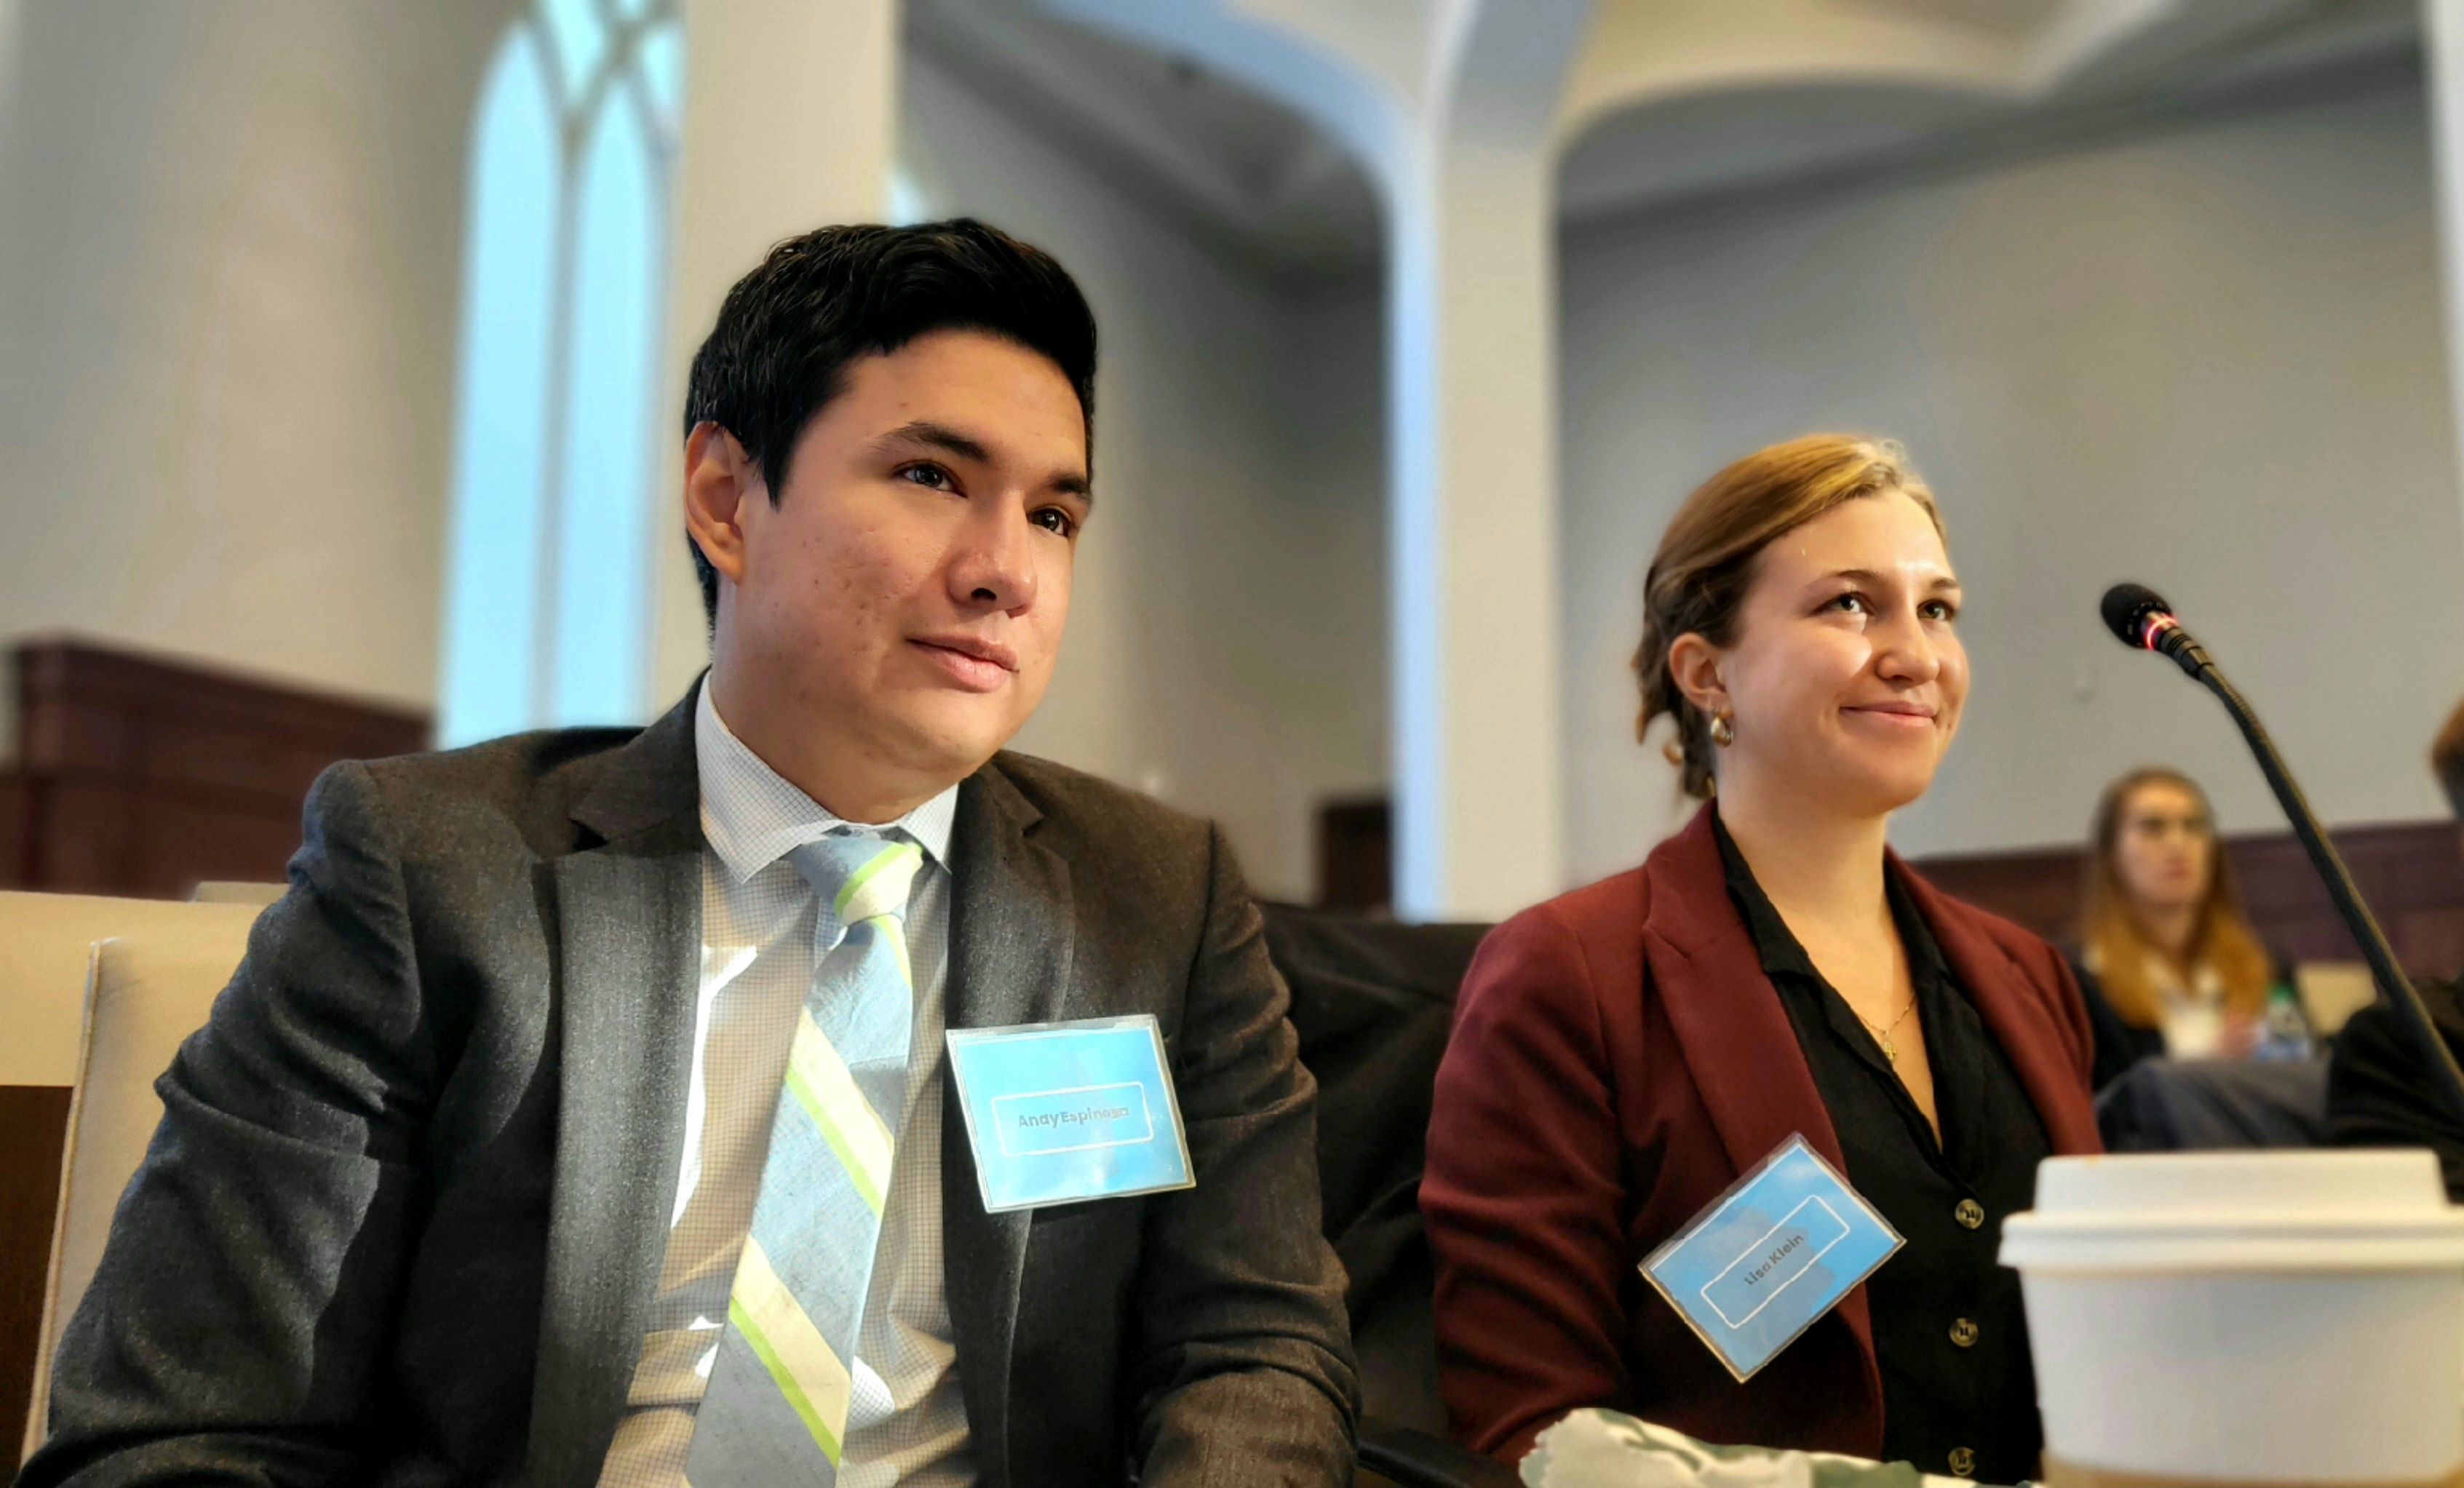 A Latino student and Caucasian female student are seated next to one another in a setting meant to resemble the United Nations.